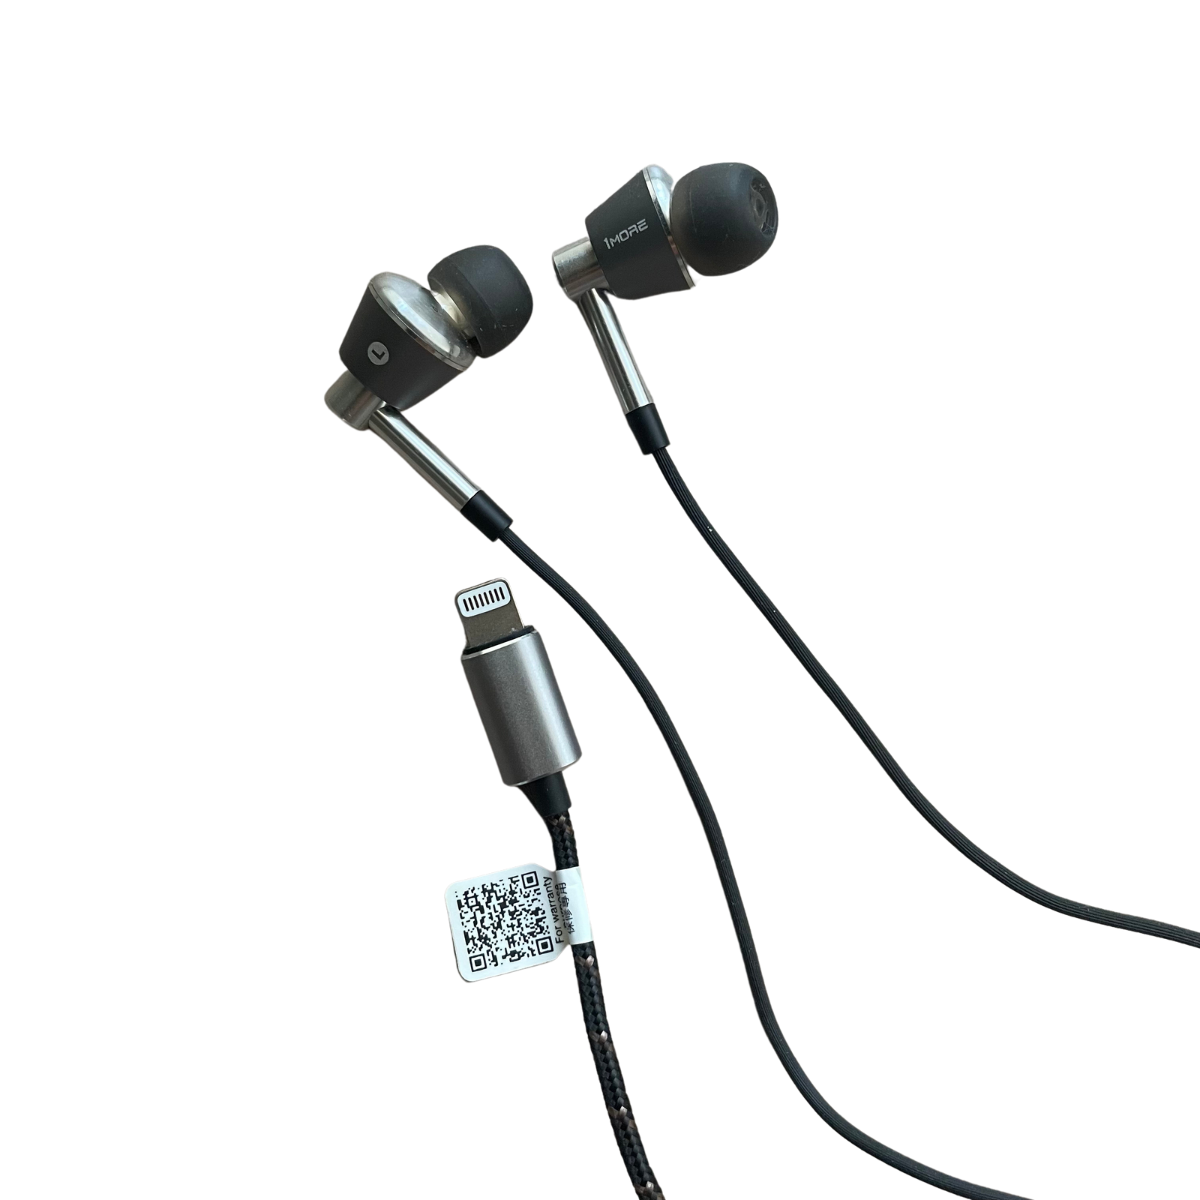 1MORE Triple Driver Lightning Earphones With In-built DAC, MIC & Volume Rockers - Silver (DEMO Unit)